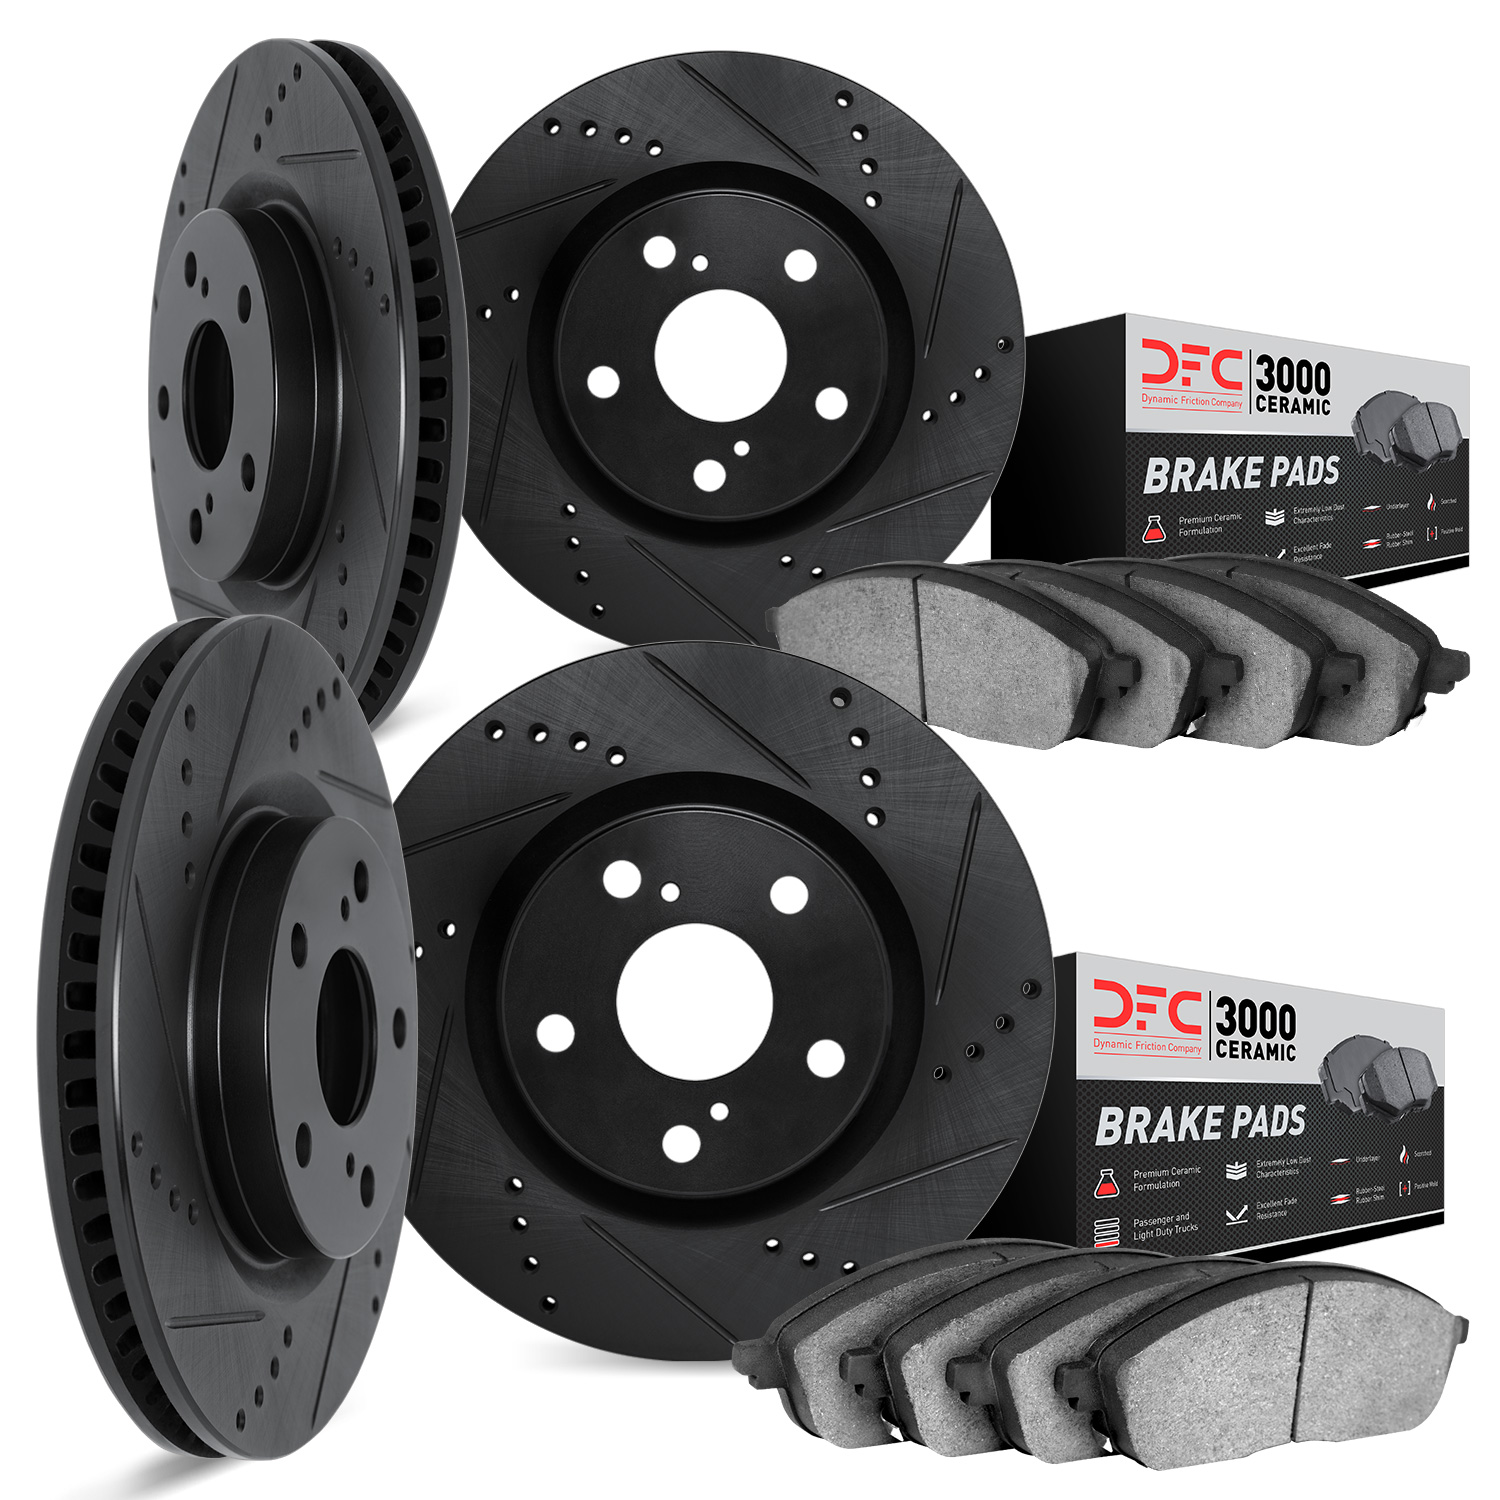 8304-42020 Drilled/Slotted Brake Rotors with 3000-Series Ceramic Brake Pads Kit [Black], Fits Select Mopar, Position: Front and